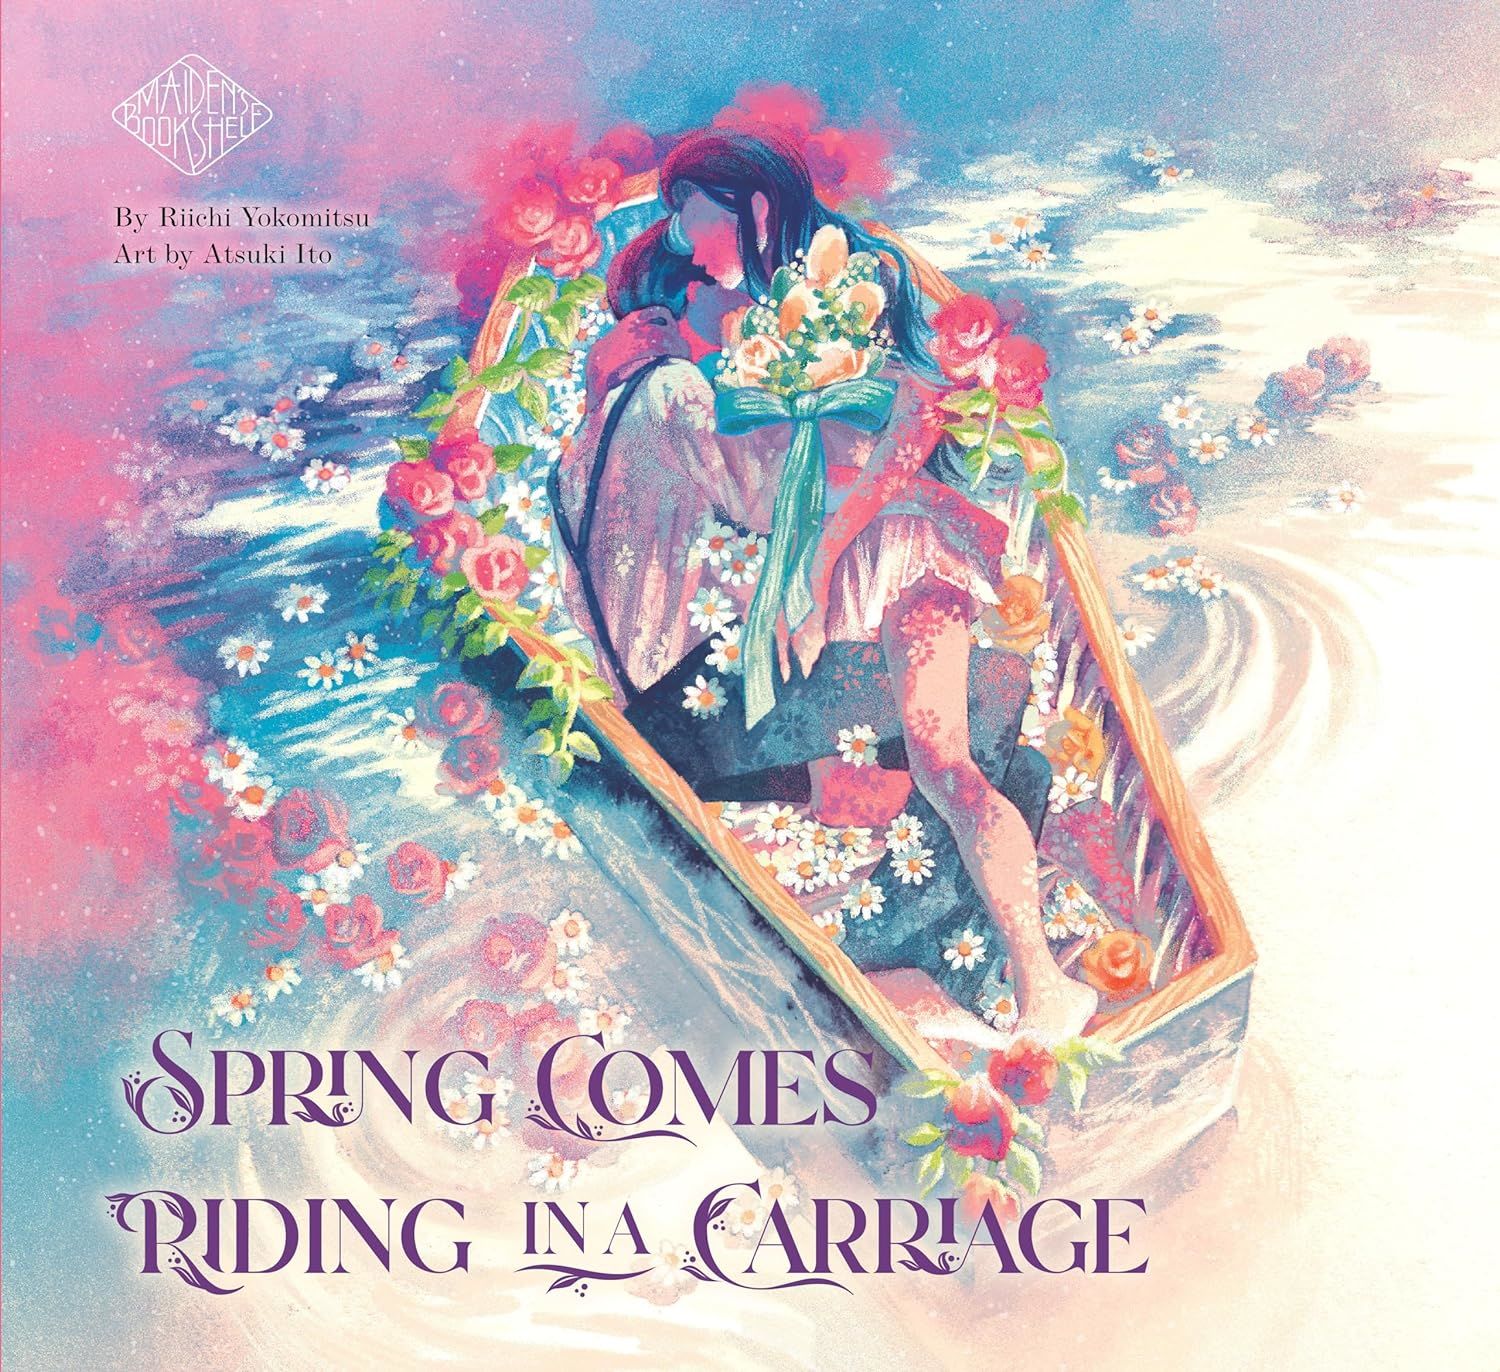 Spring Comes Riding in a Carriage: Maiden's helf